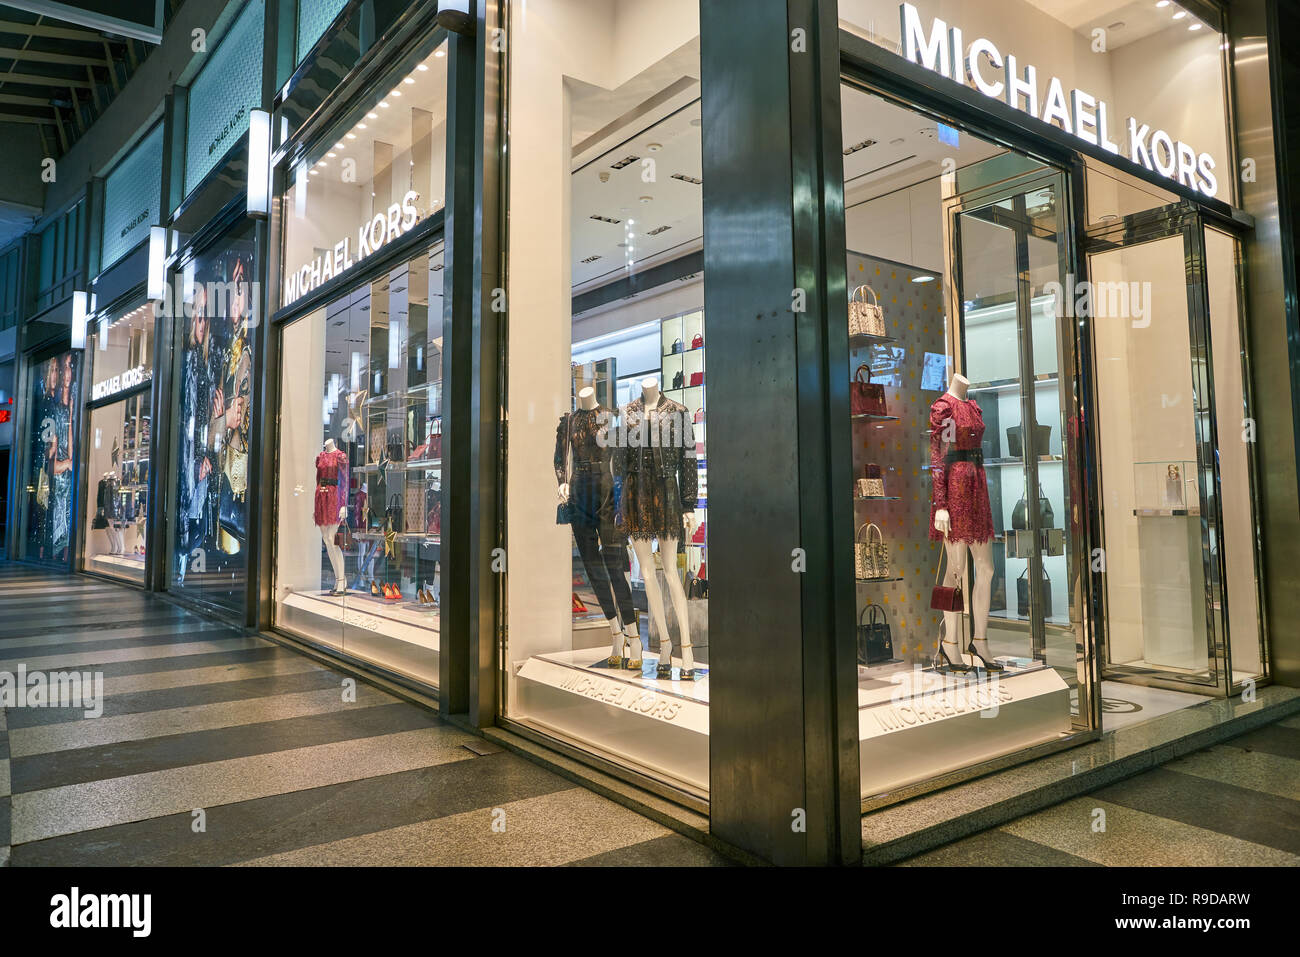 Michael Kors Store In Milano Italy Stock Photo - Download Image